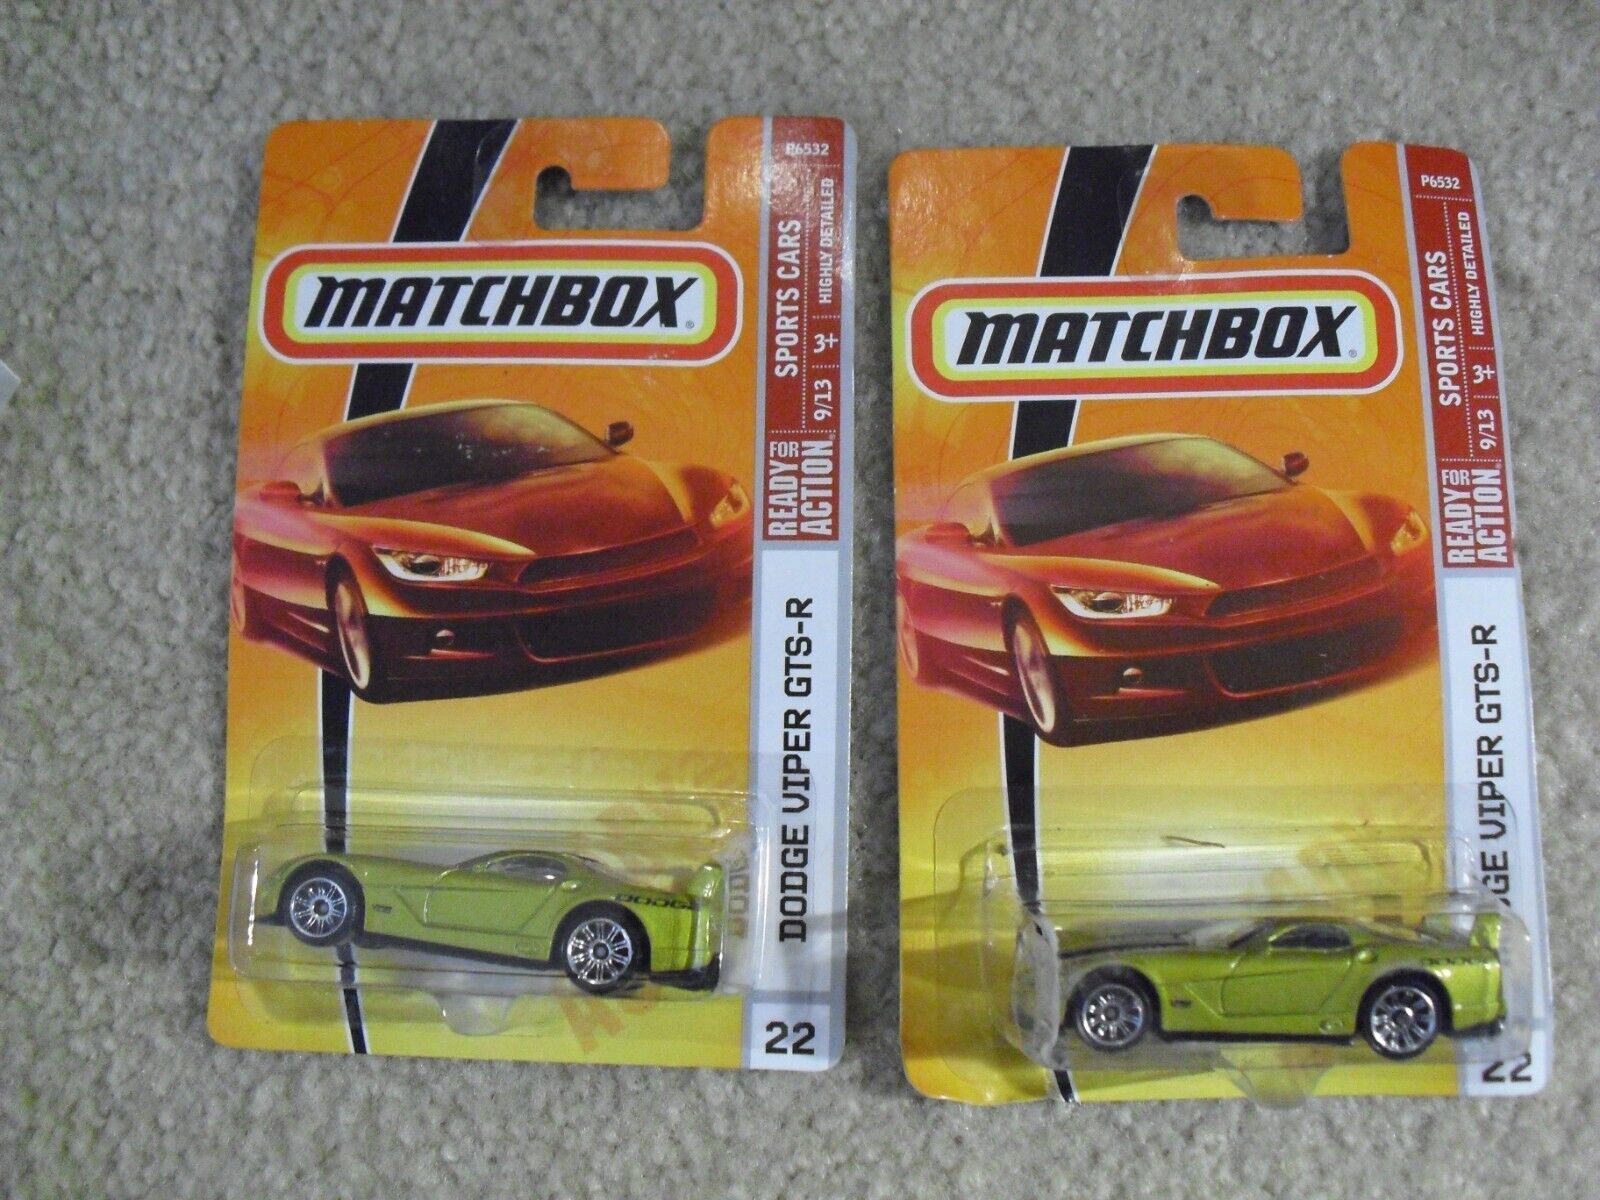 Primary image for Lot of 2 2008 Matchbox #22 Dodge Viper GTS-R Cars P6532